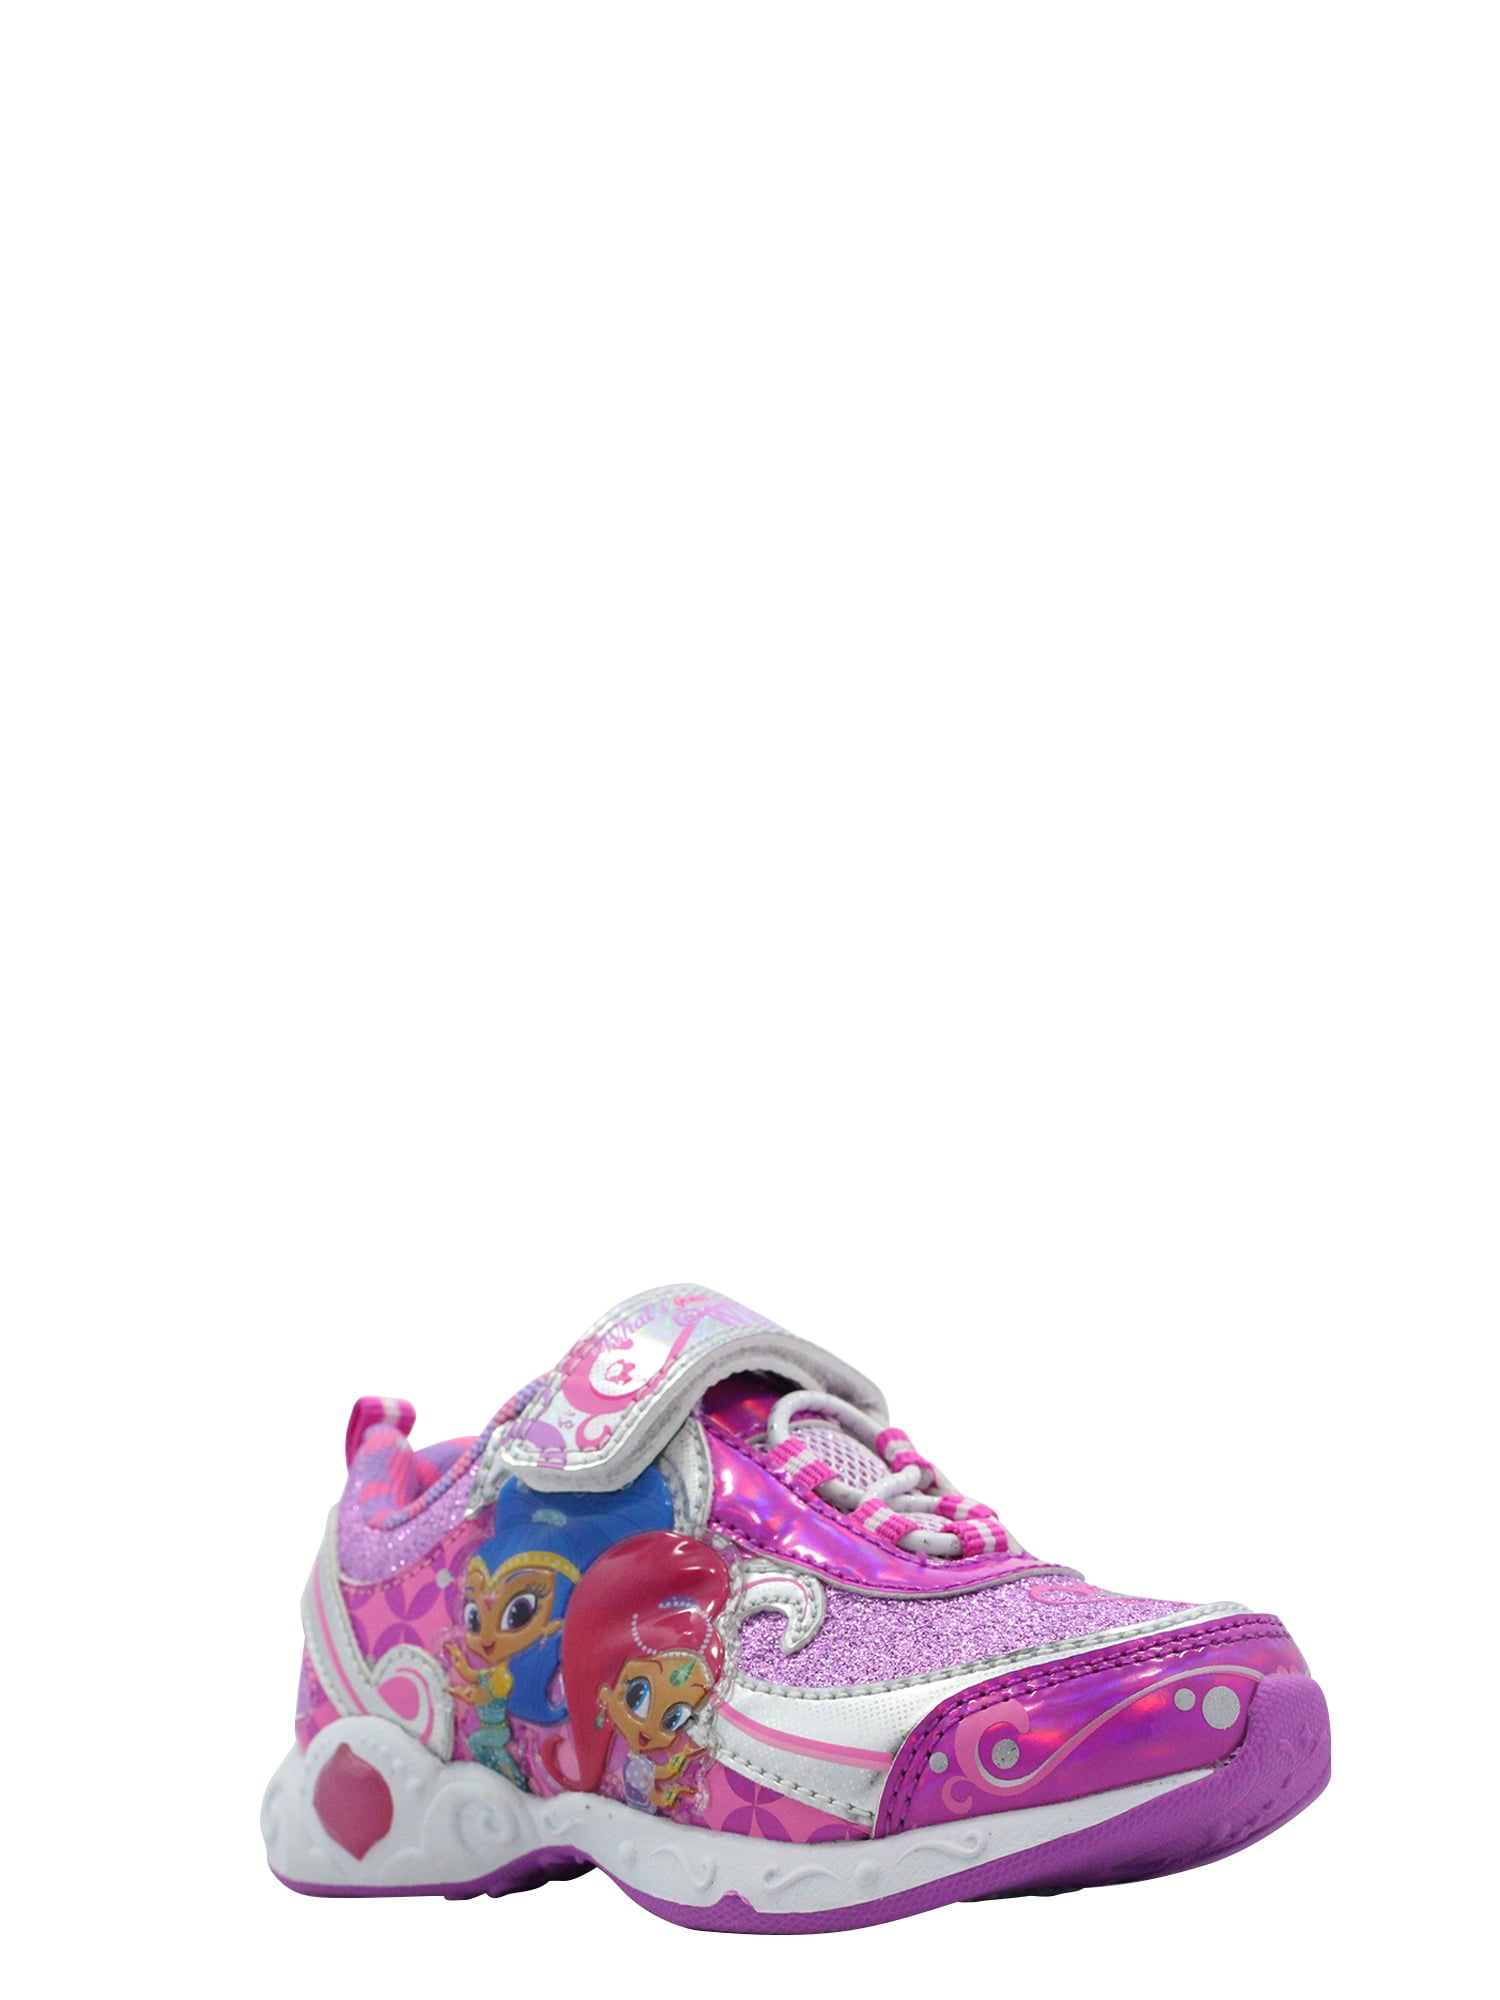 shimmer and shine light up sneakers